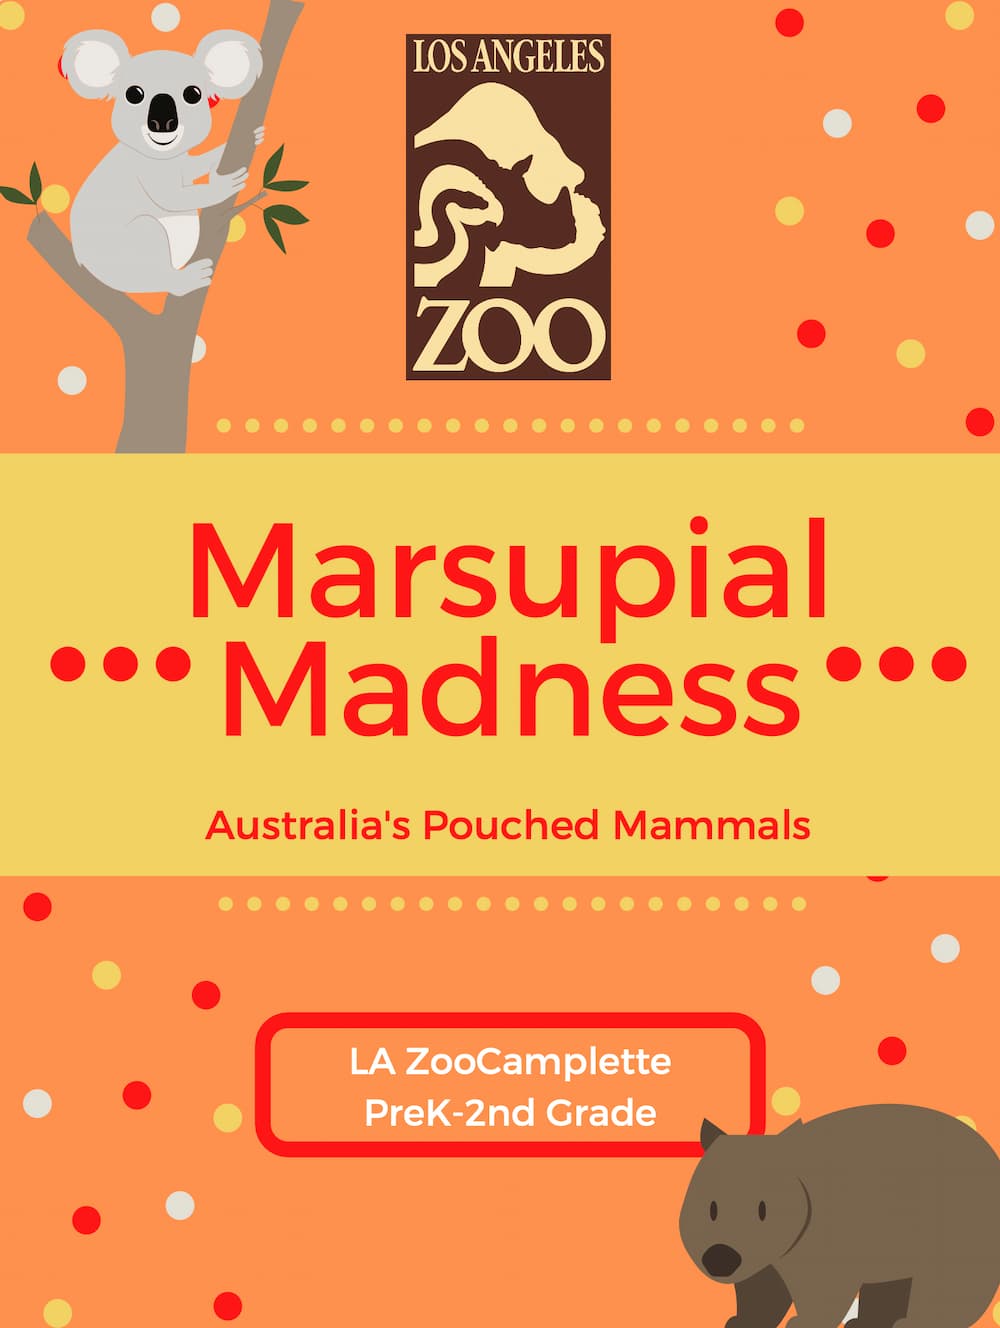 Cover for Marsupial Madness with a koala and a wombat.